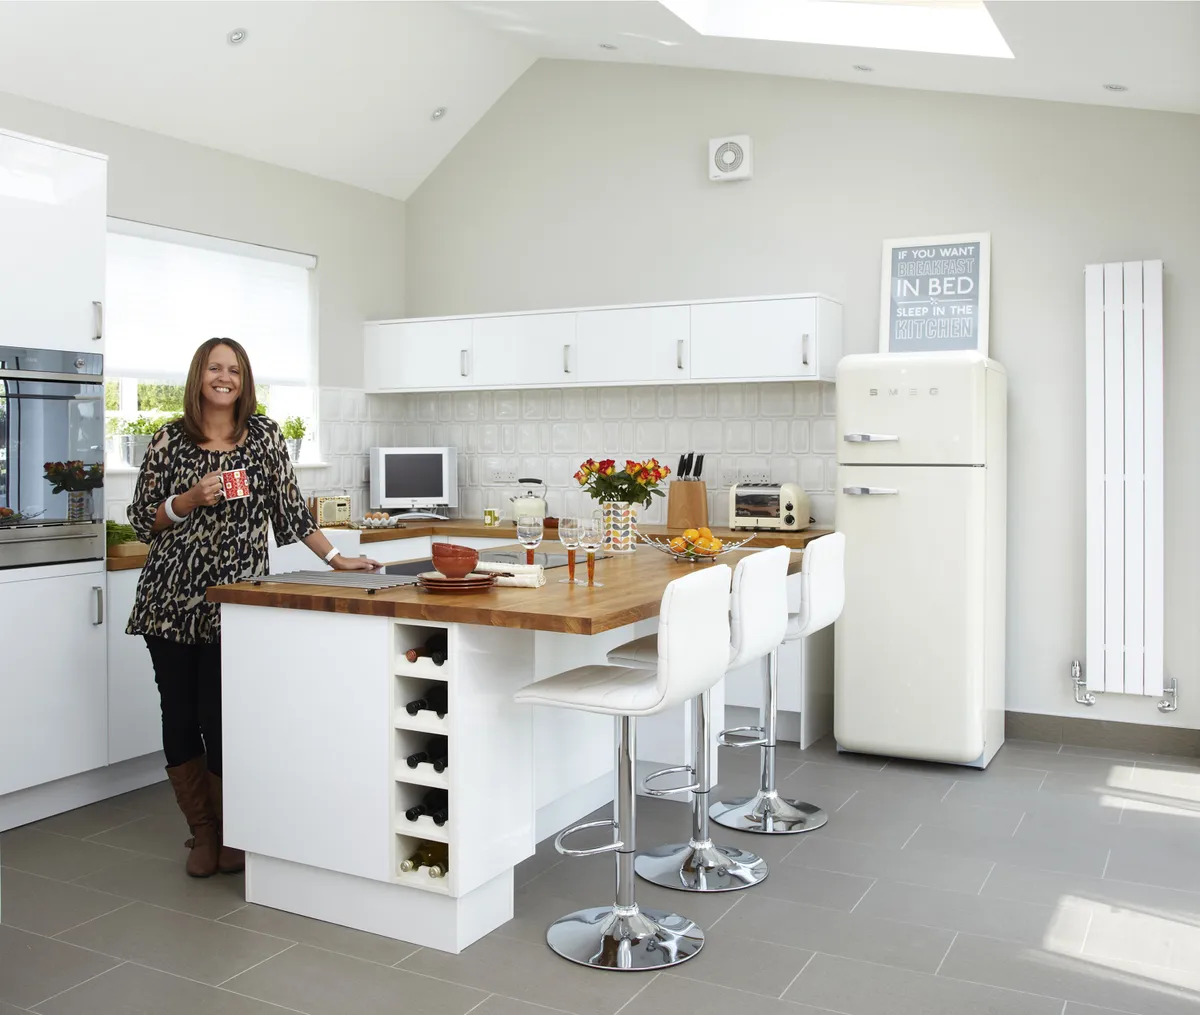 Julie’s kitchen is a sociable space thanks to the central island. It was the main reason Julie wanted to extend the kitchen, and now she can enjoy cooking and entertaining